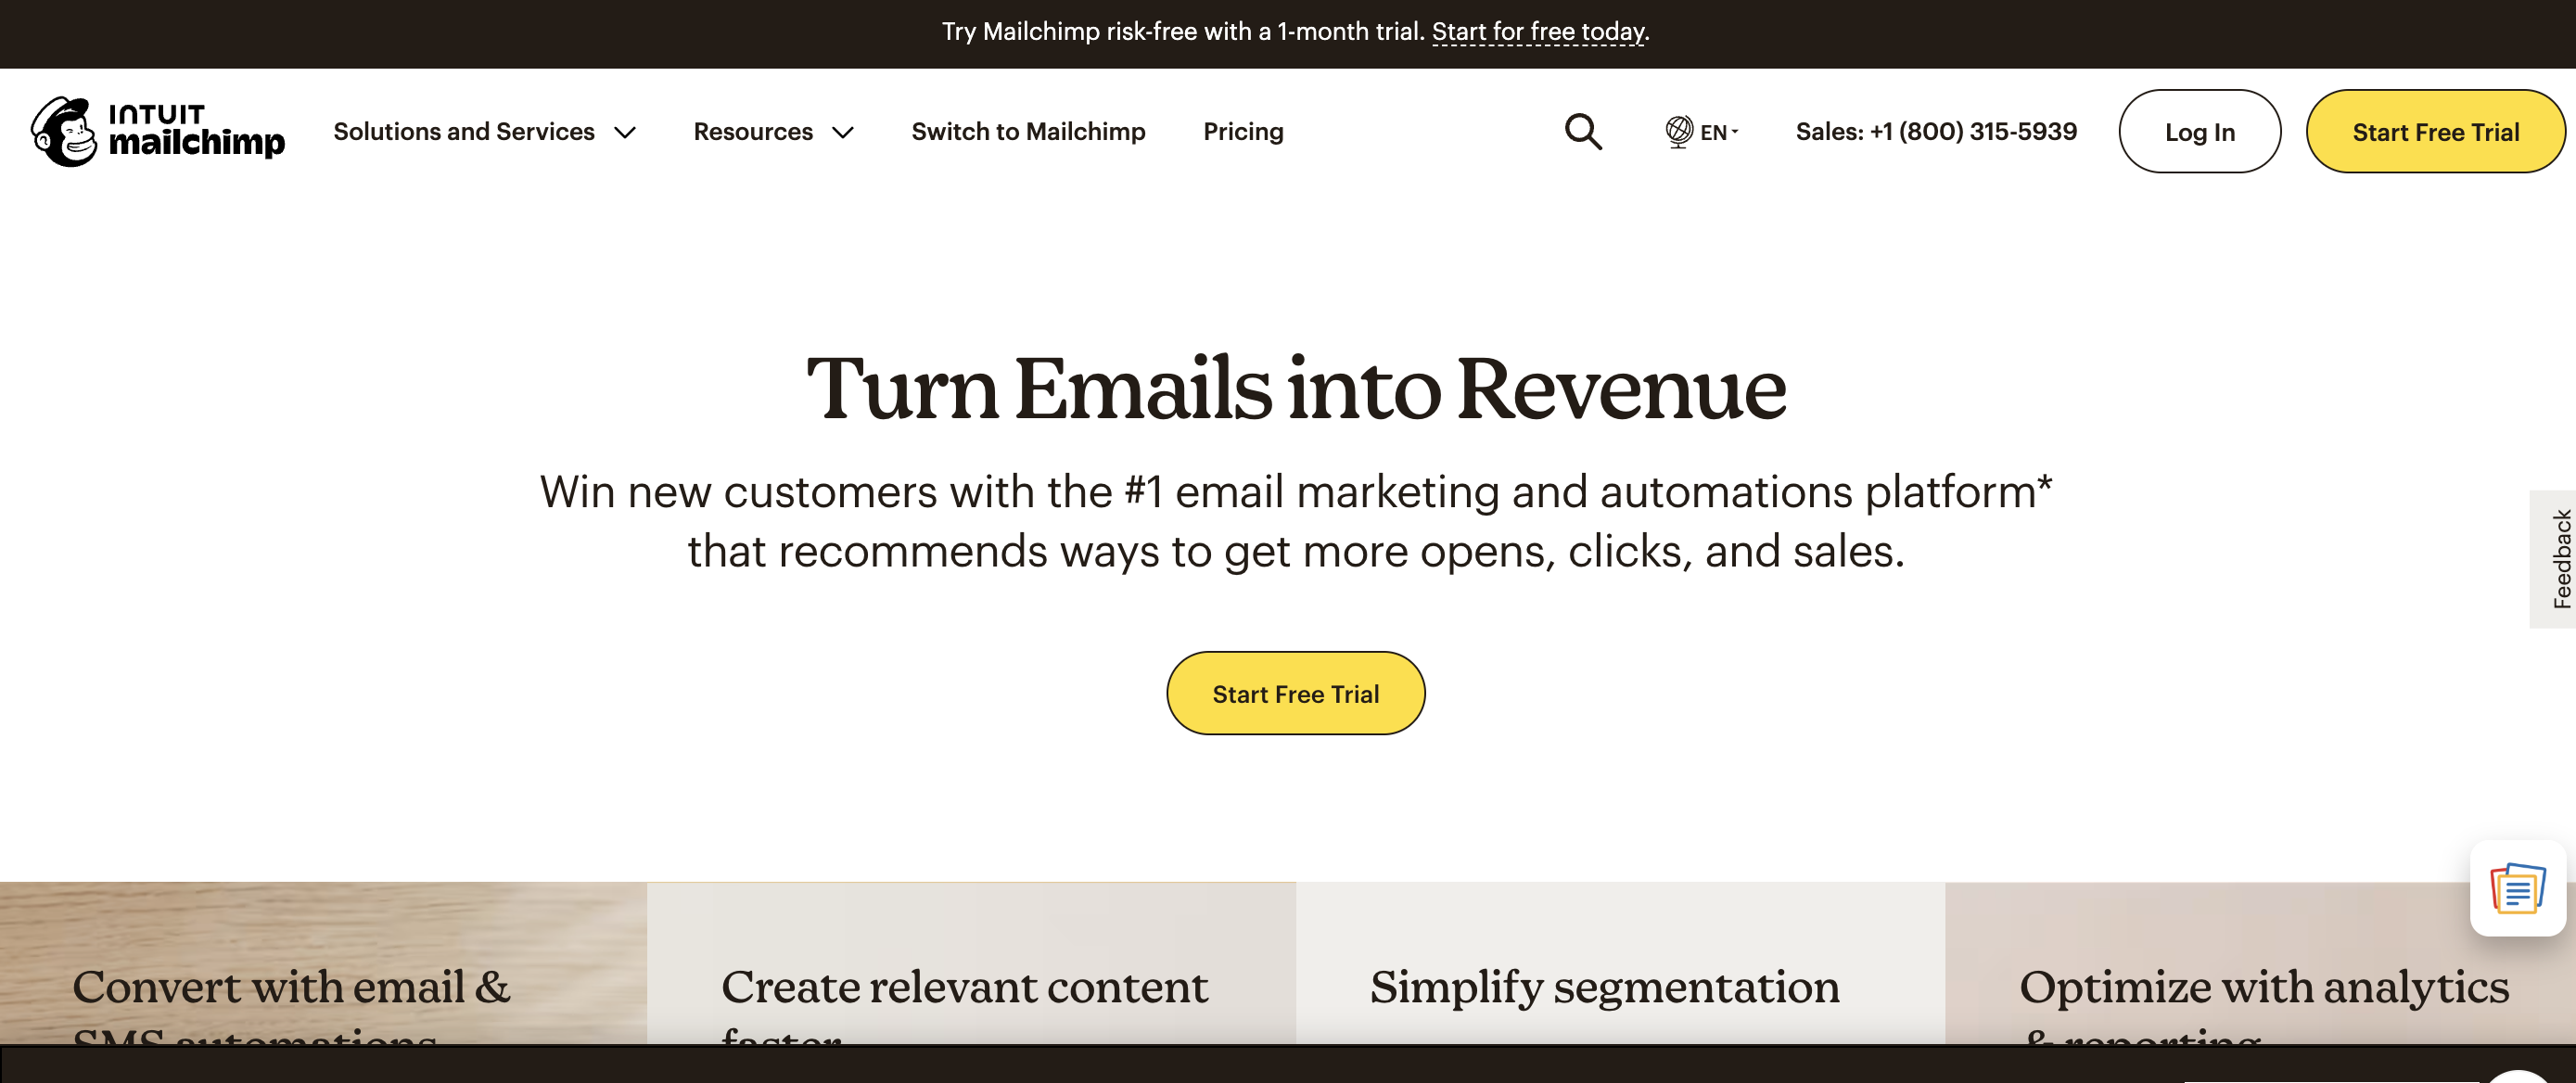 MailChimp - home page - small business email marketing tools